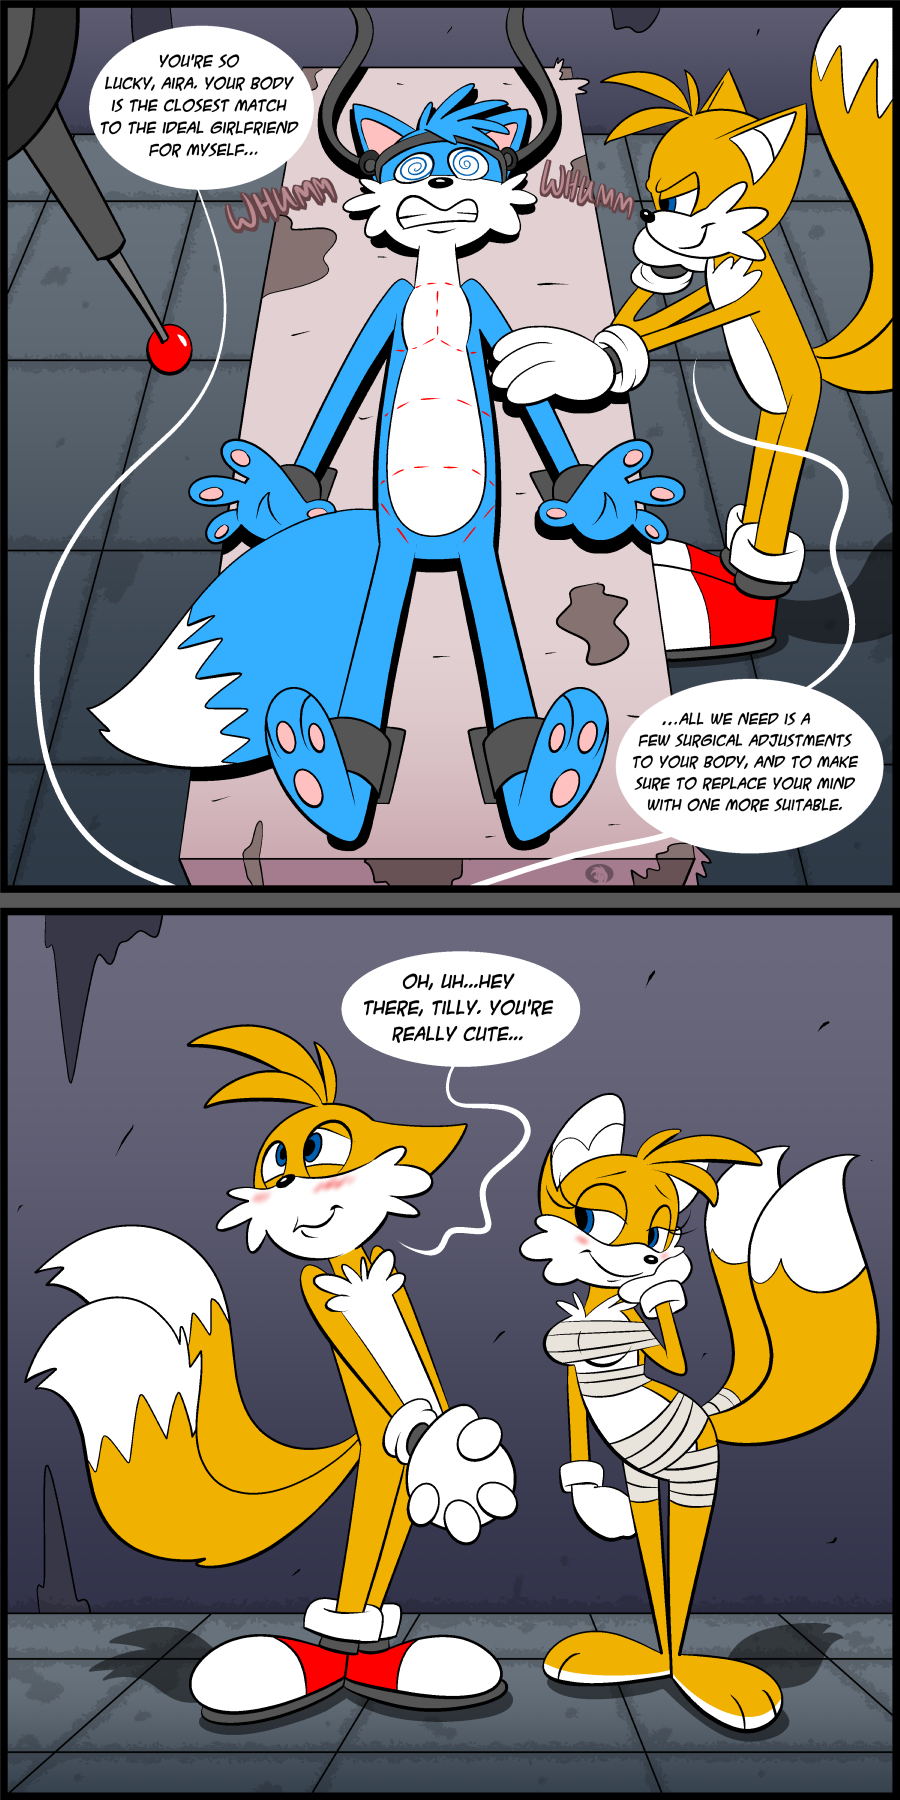 A Tale of Tails